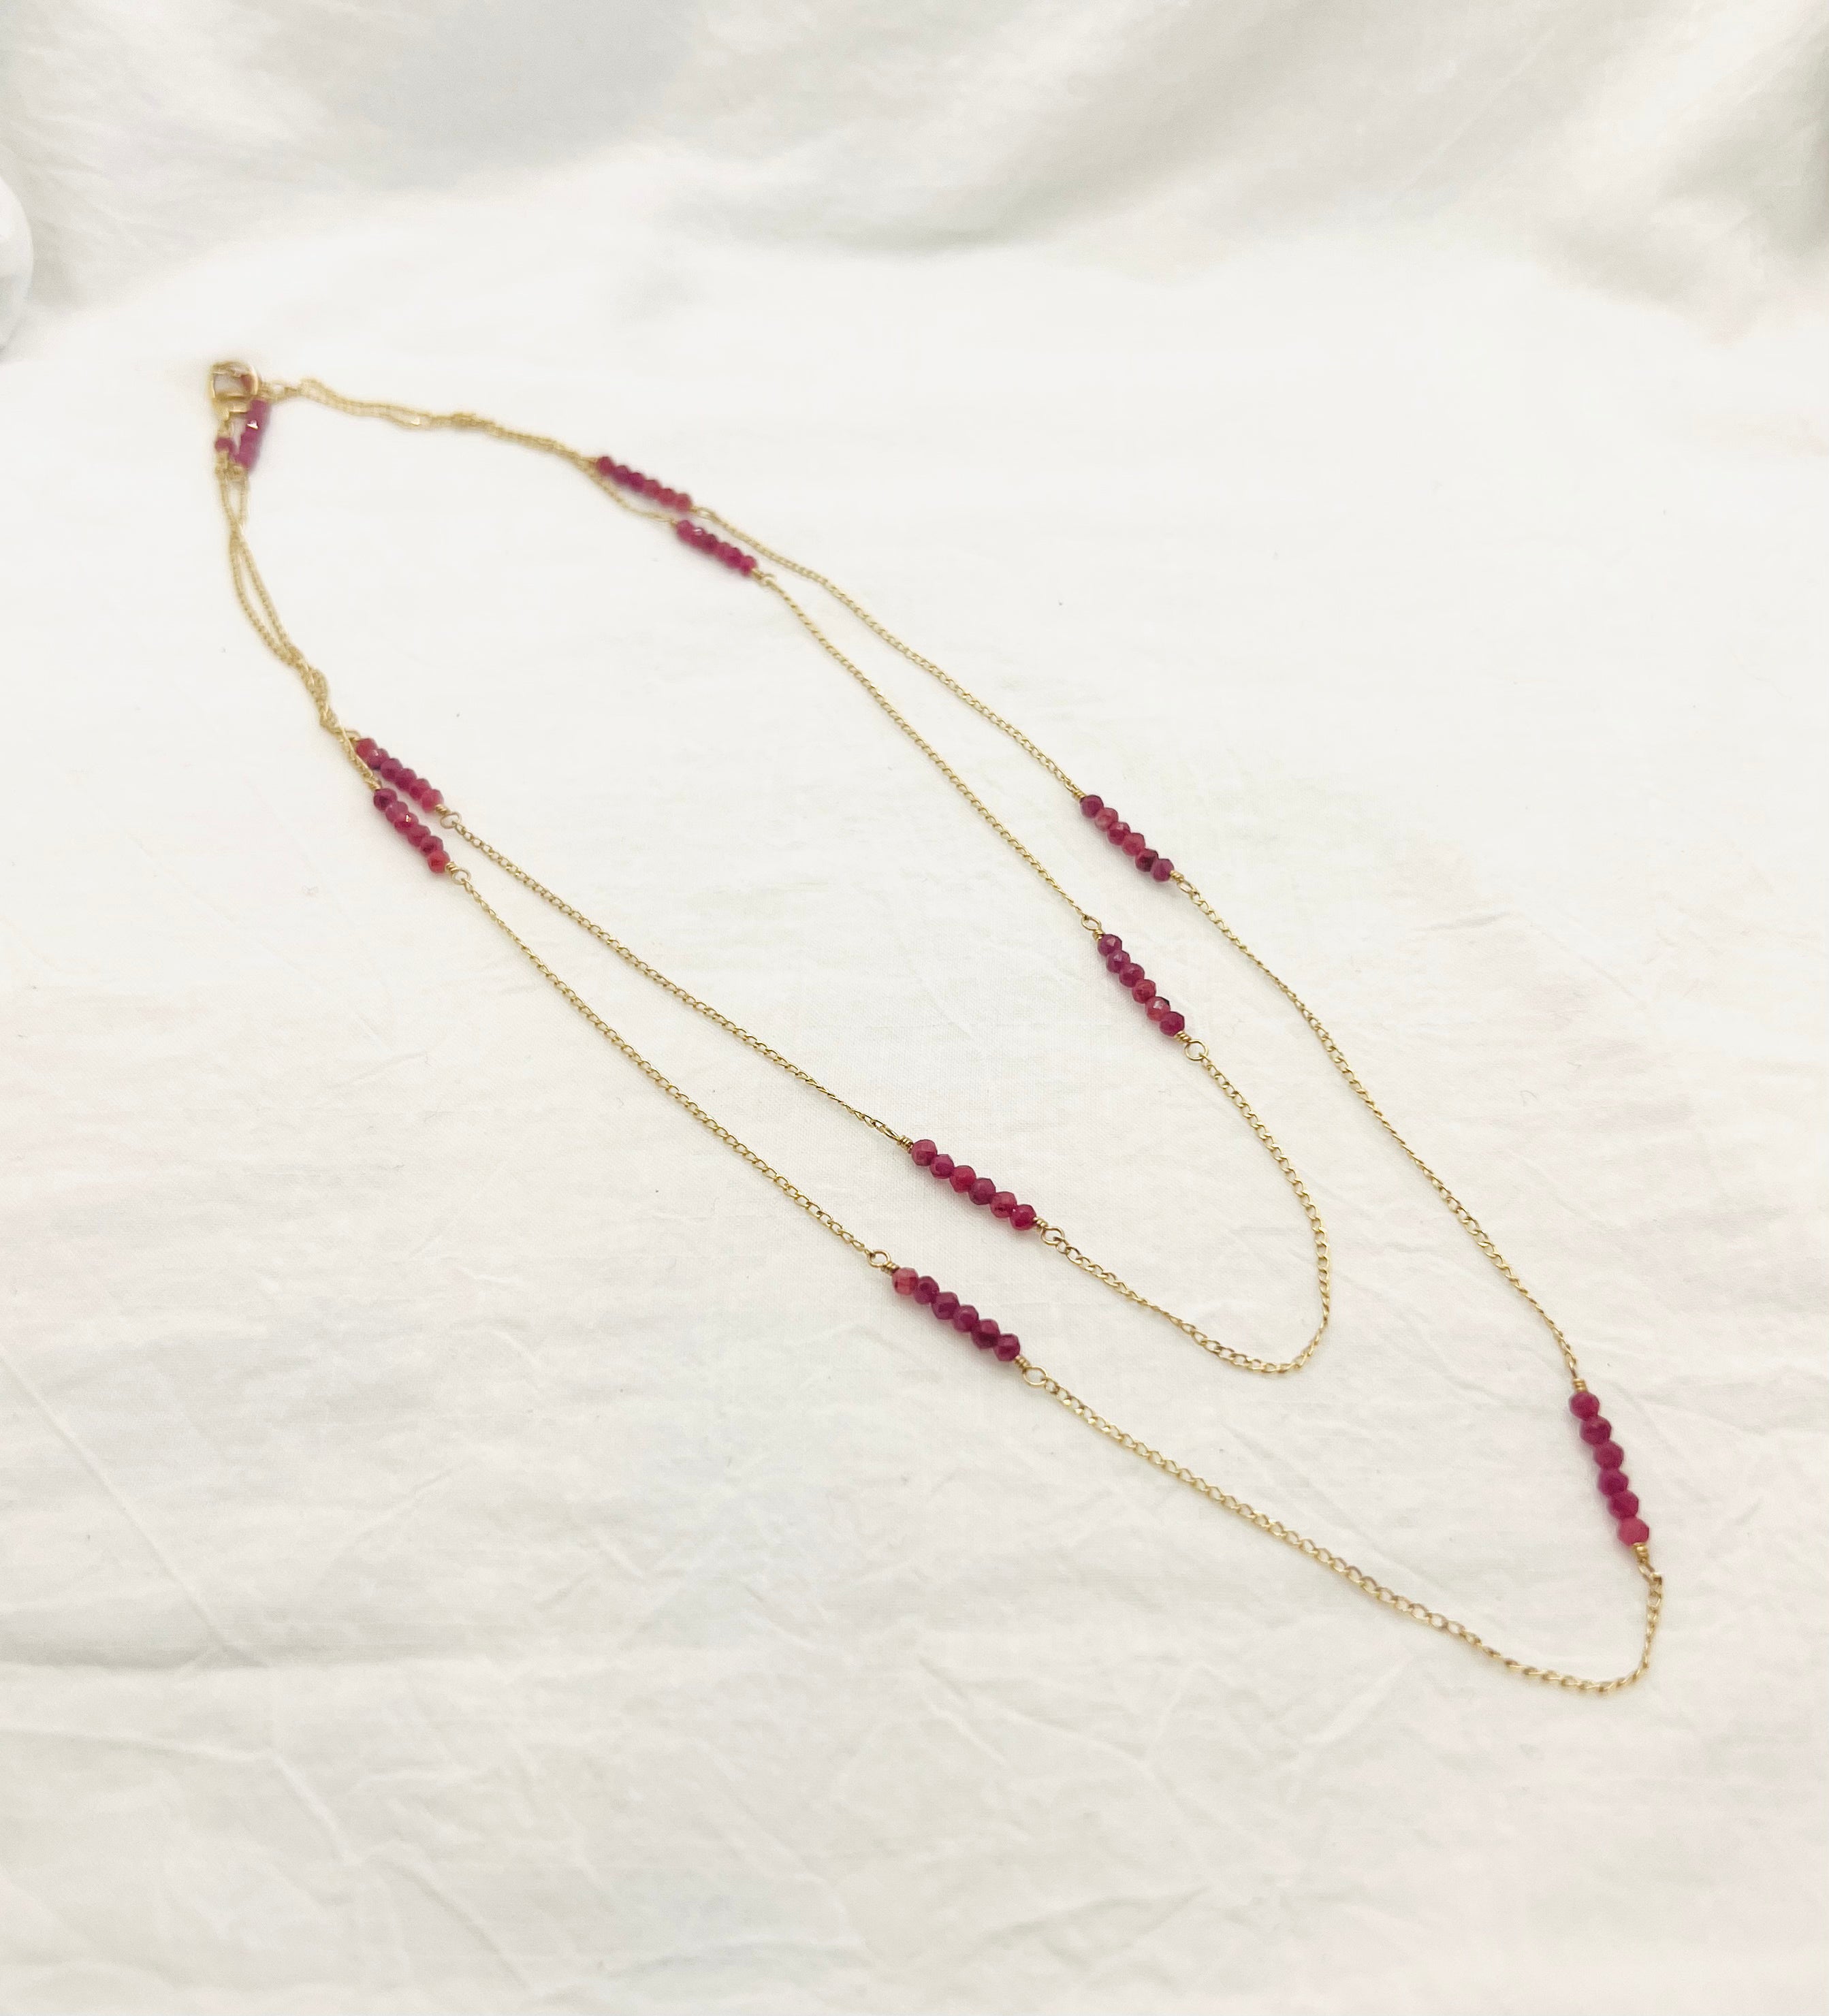 Long Stone Necklace